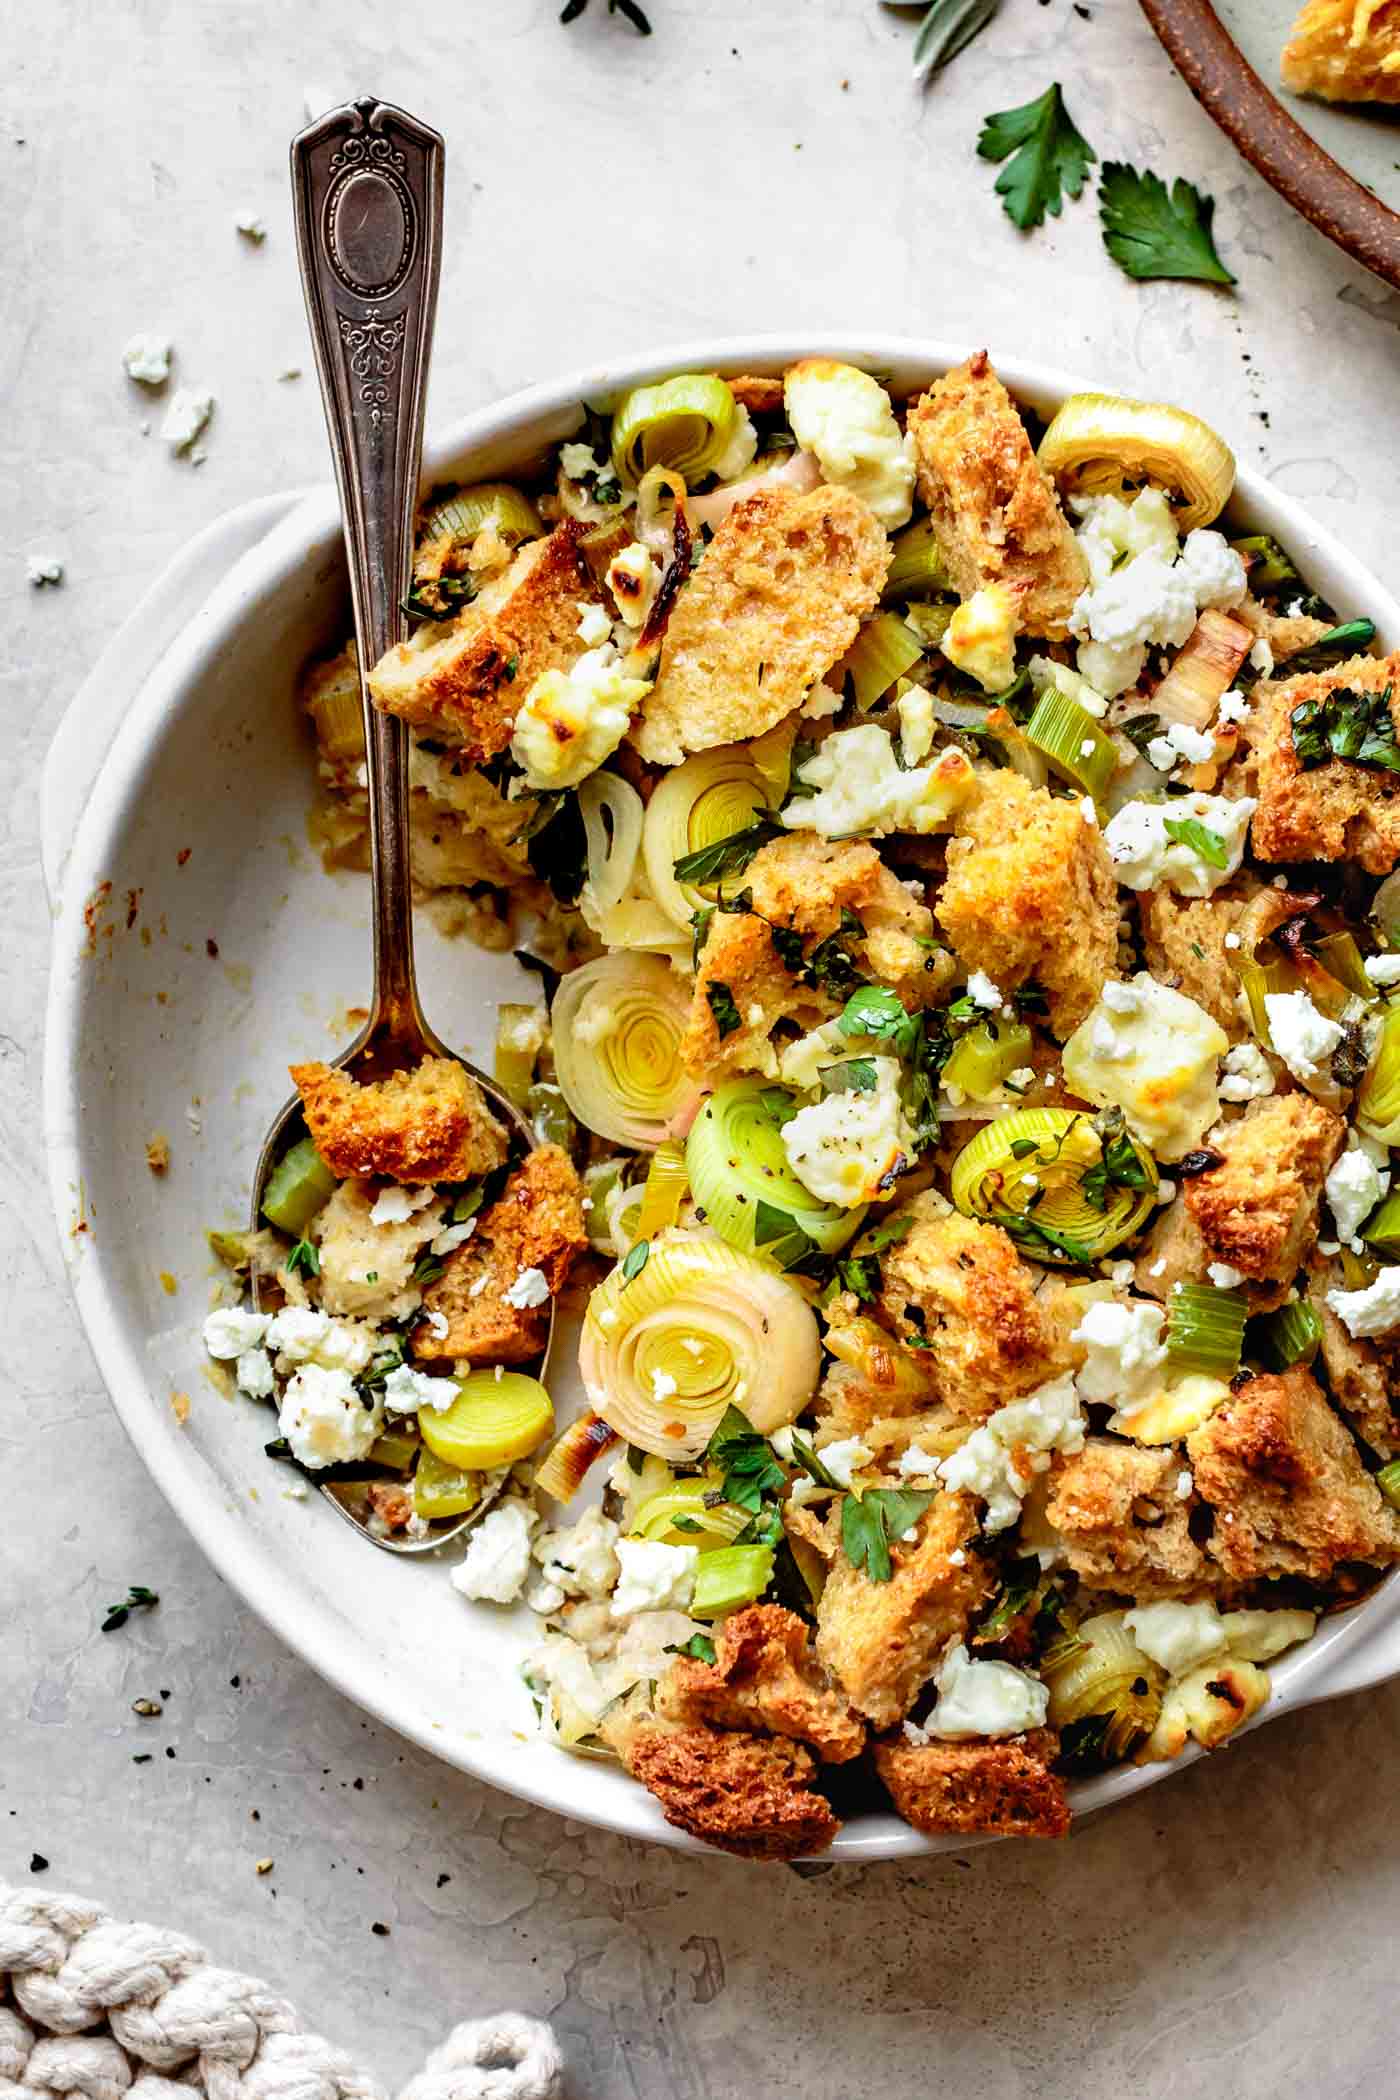 Gluten-Free Stuffing With With Leeks & Goat Cheese